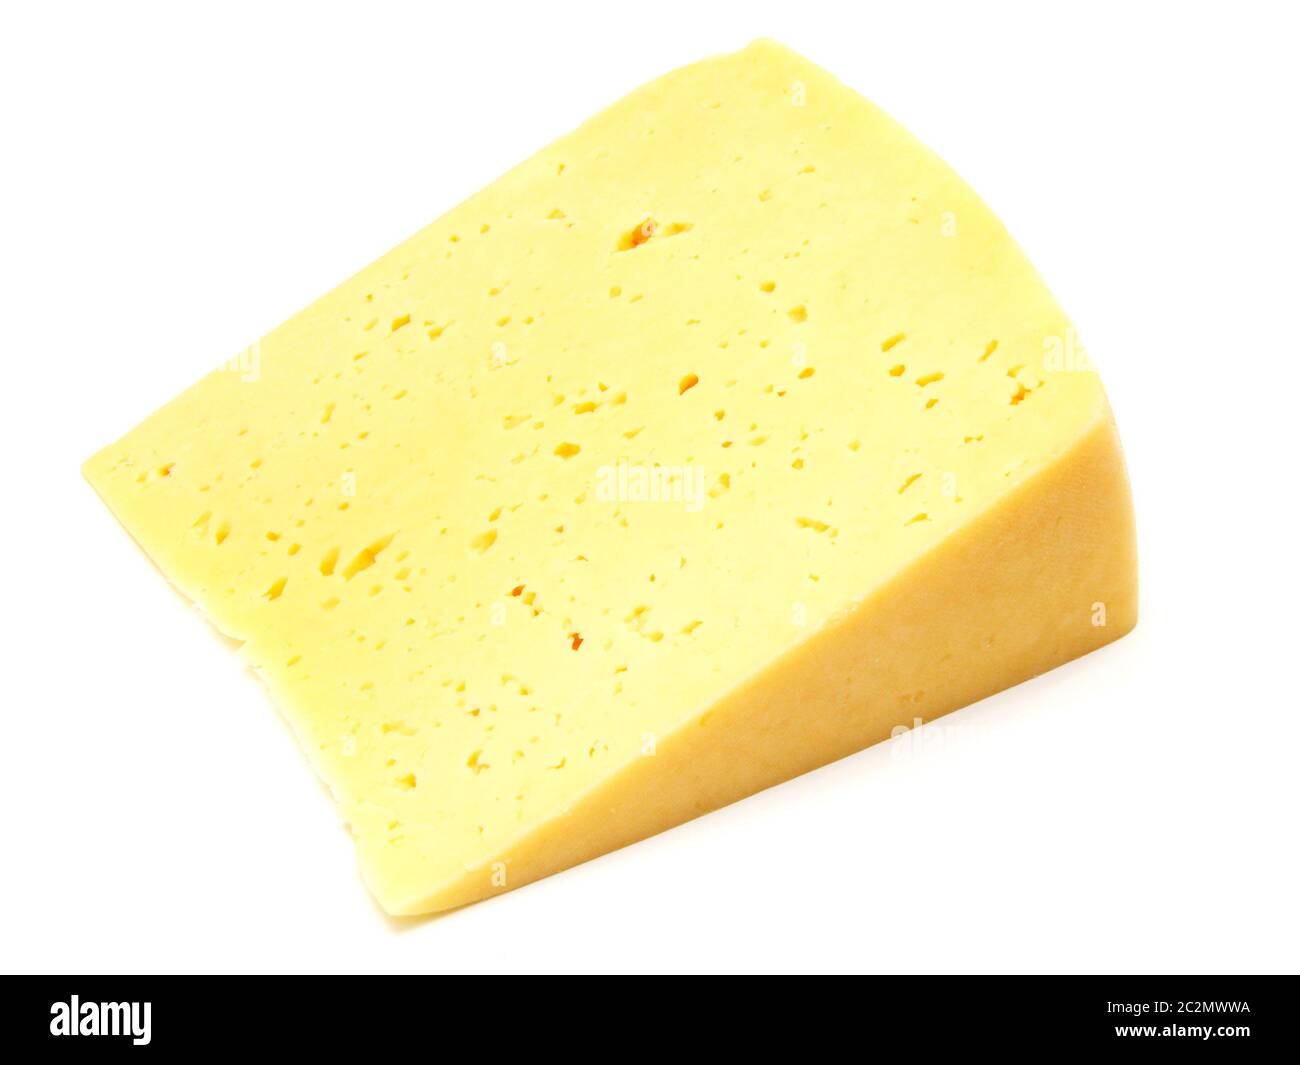 A piece of Swiss cheese Stock Photo